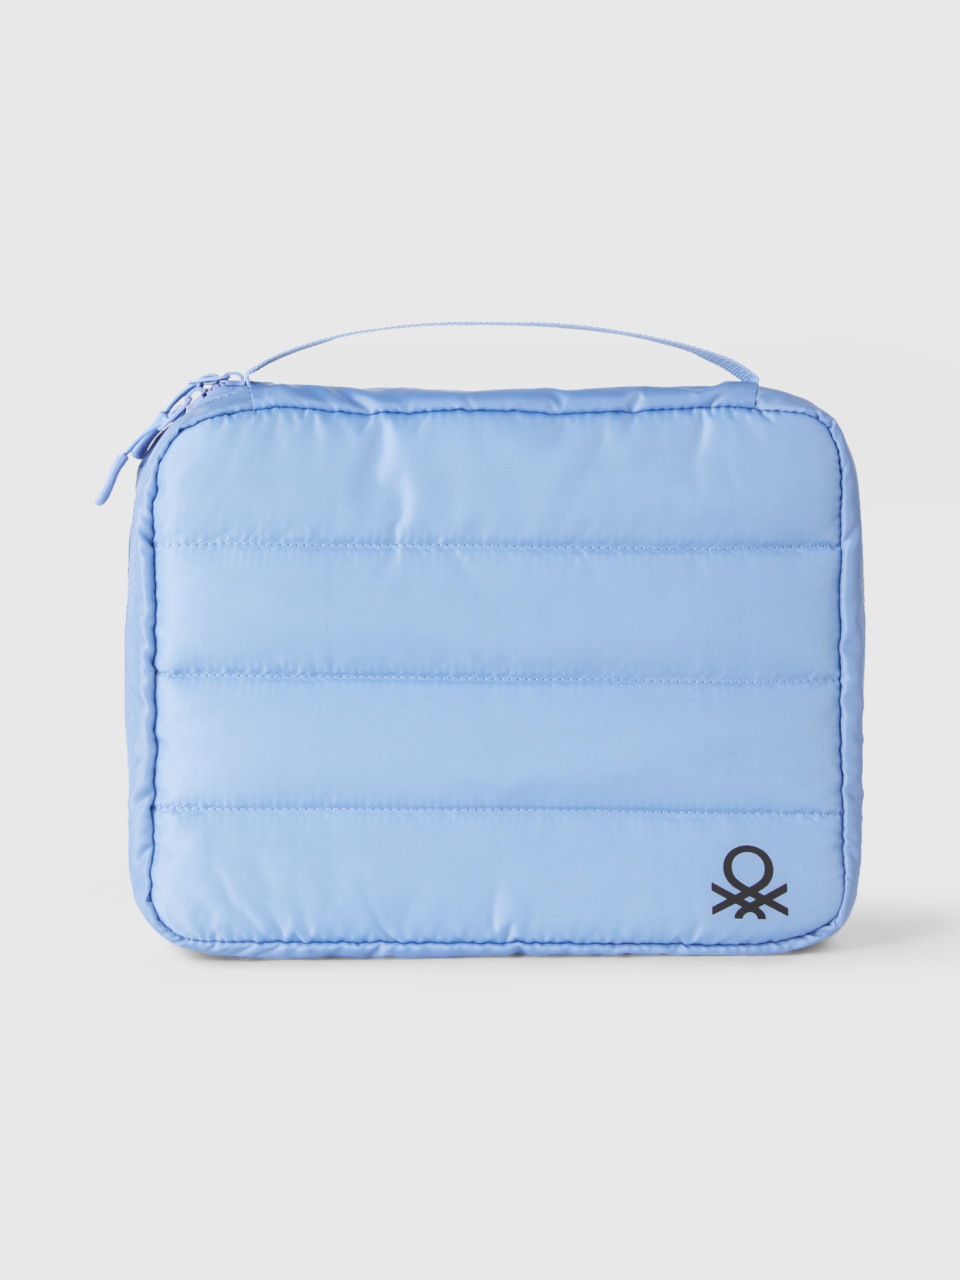 Benetton, Tablet And Accessory Case, Light Blue, Women